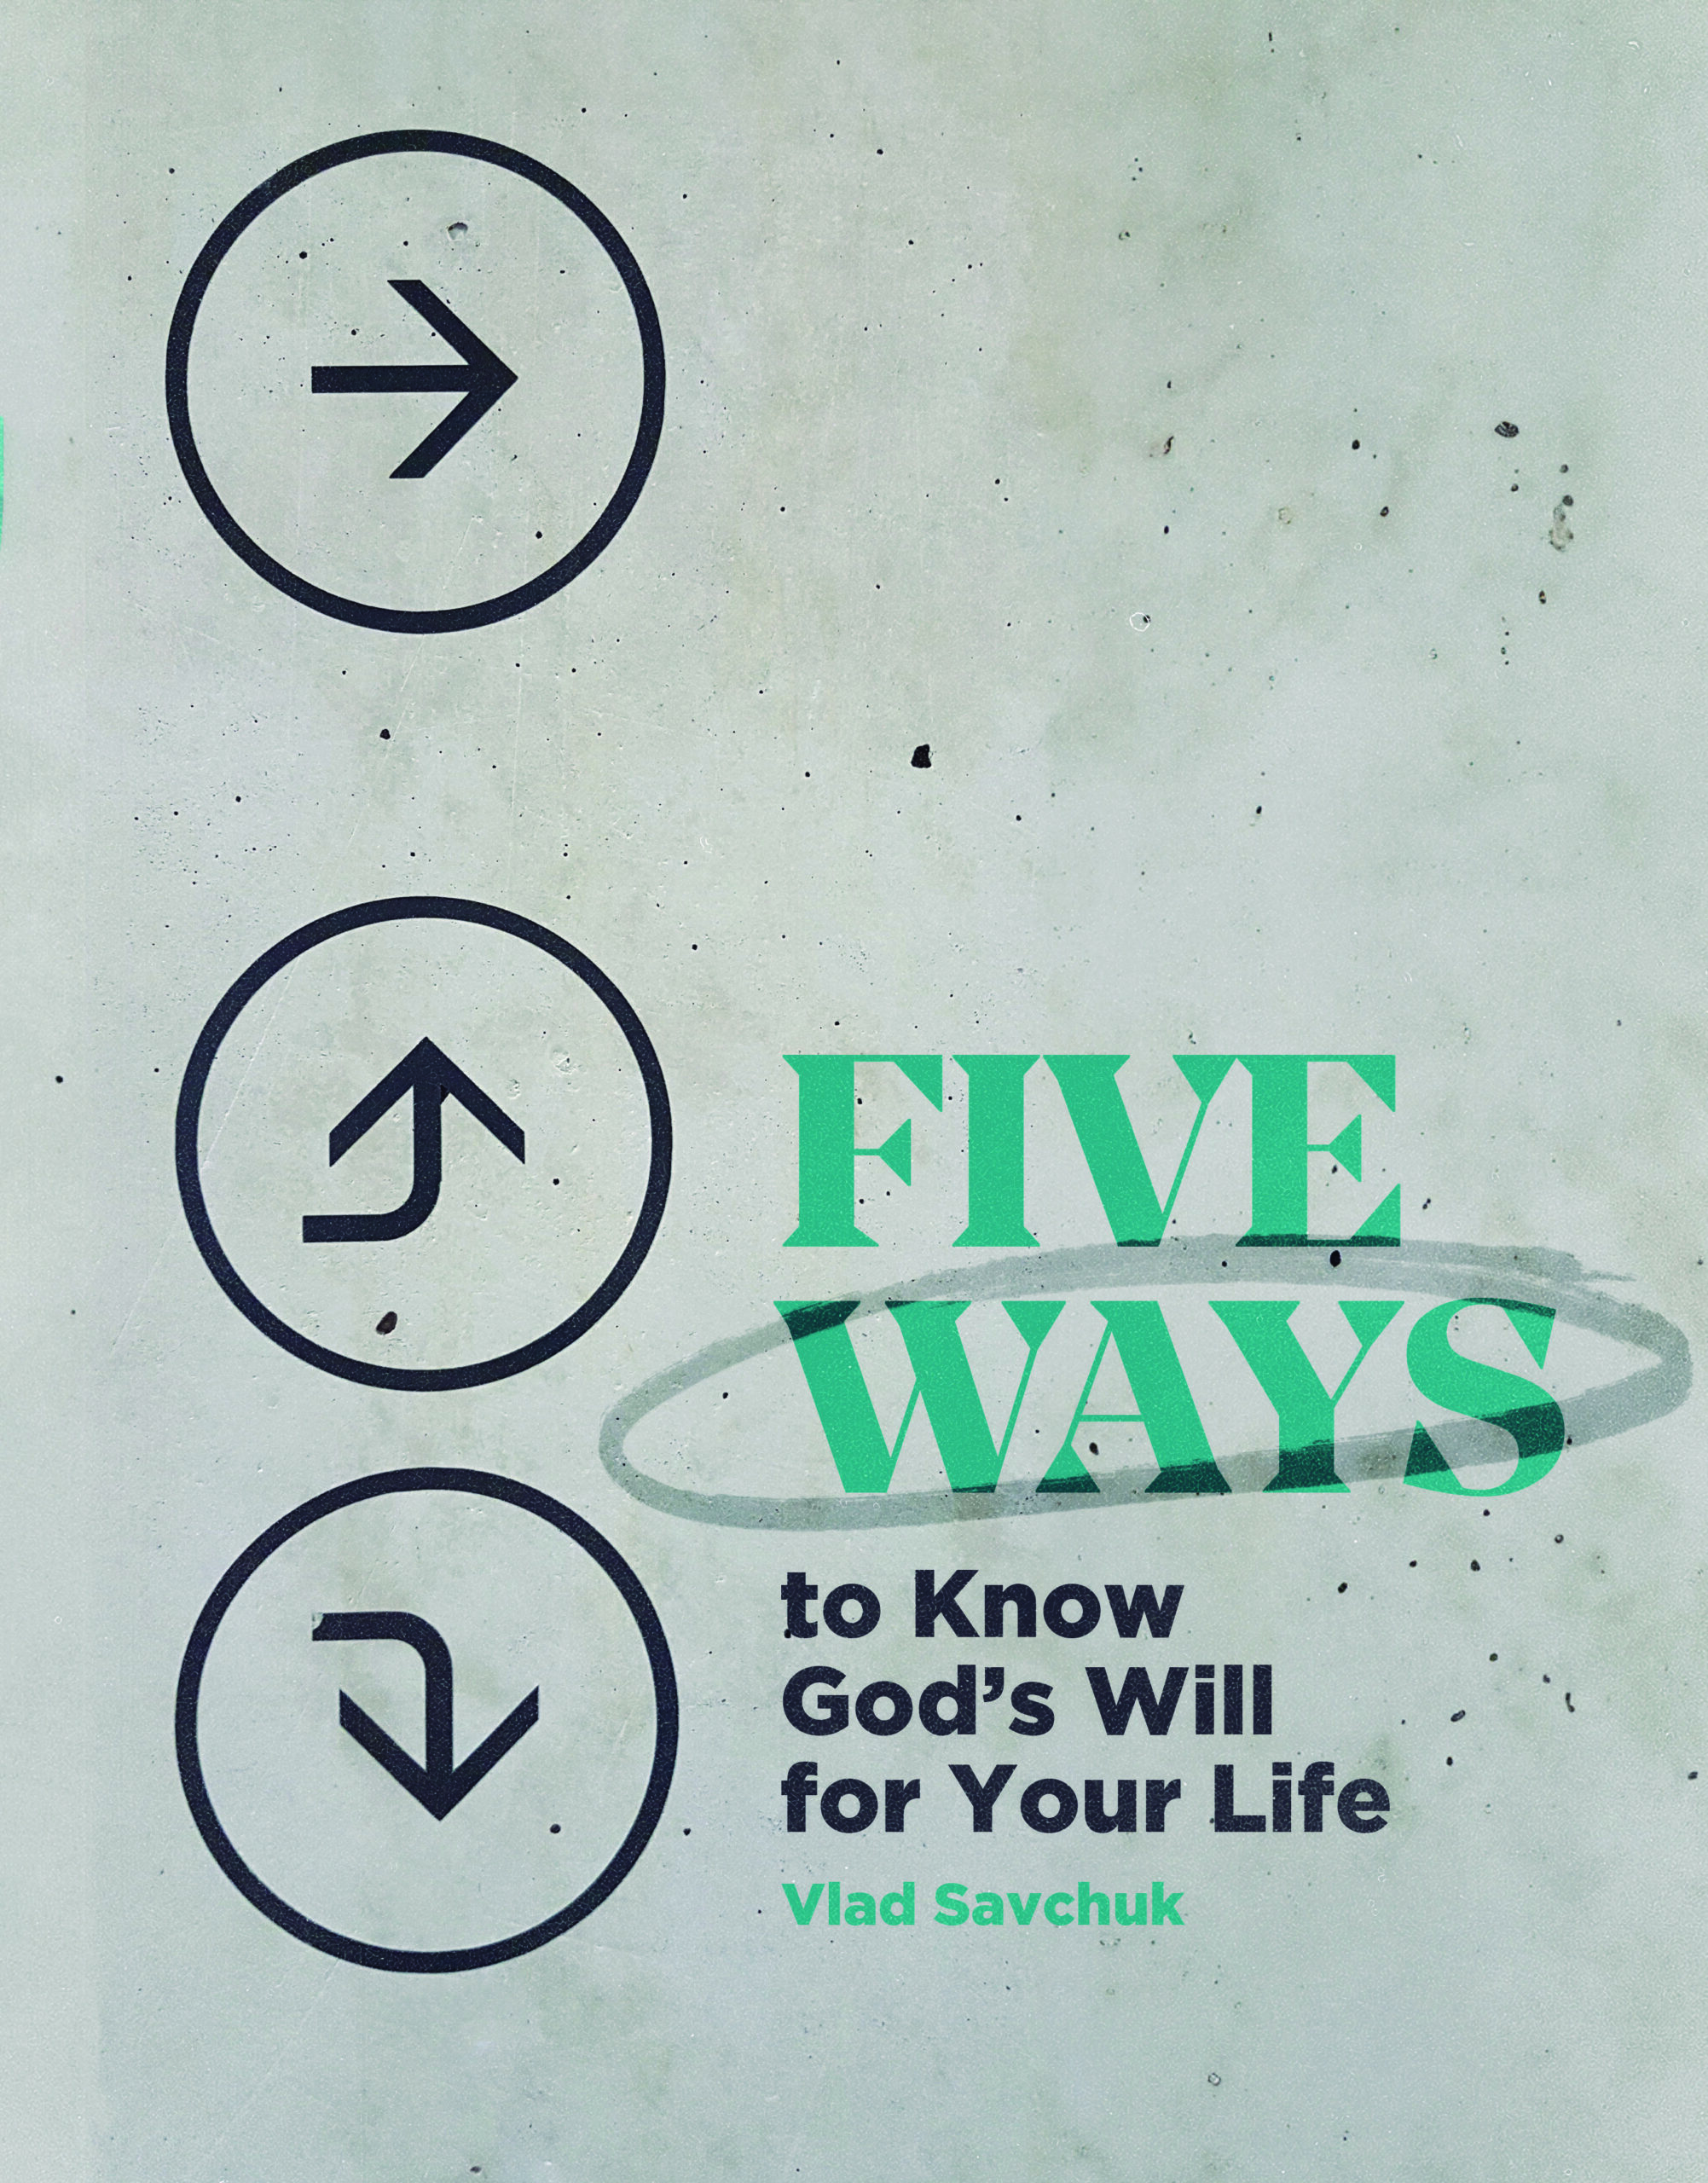 Featured Image for “5 Ways to Know God’s Will for Your Life”